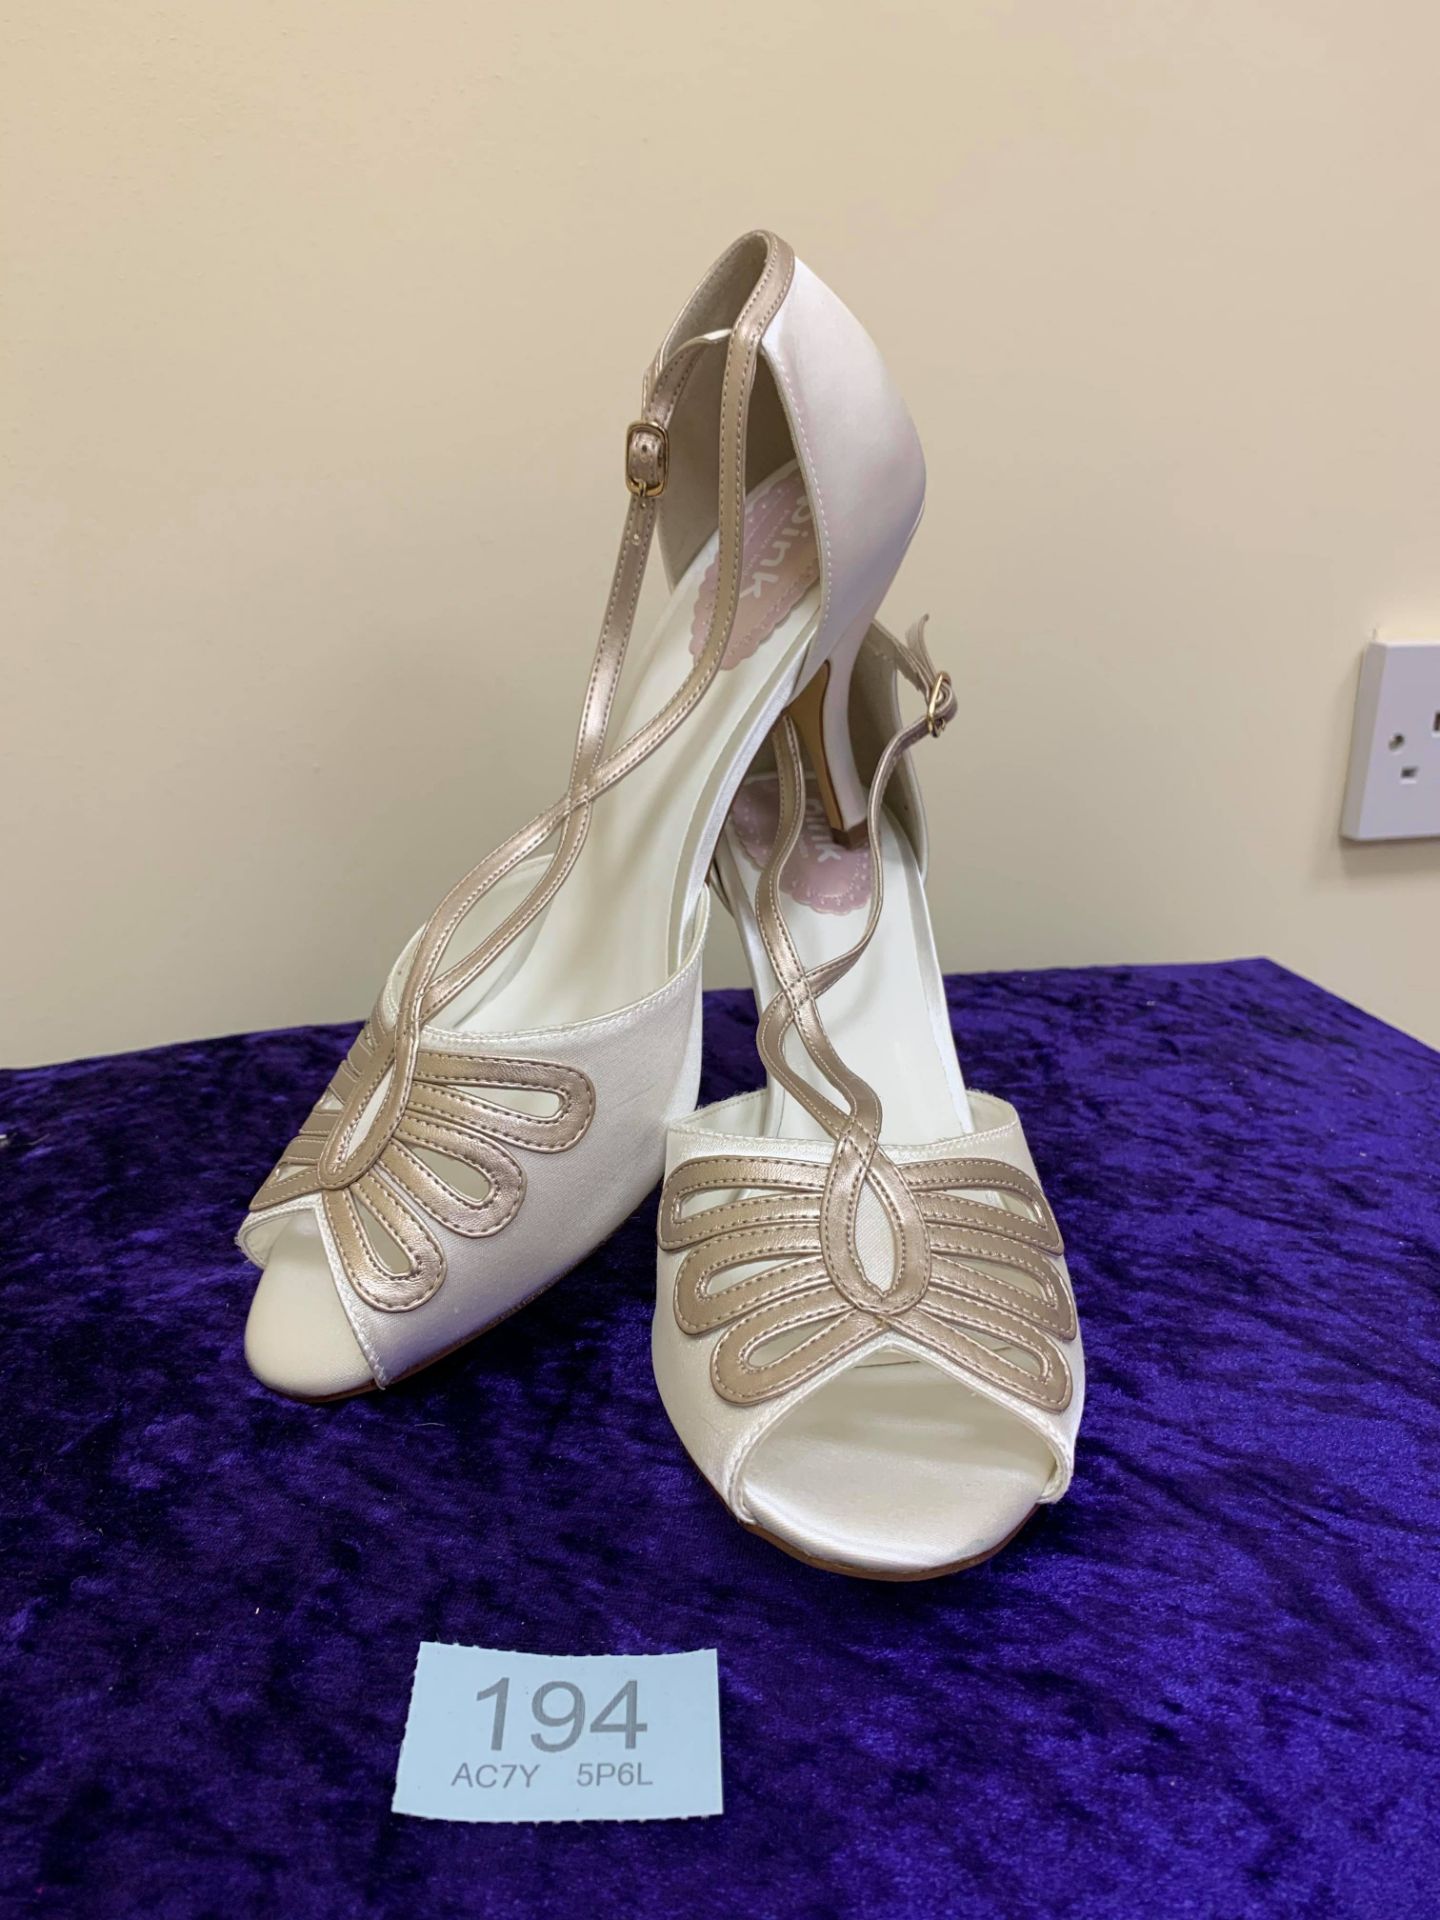 Designer Shoes Ivory/Champagne In Size 42. Code 195 - Image 7 of 7